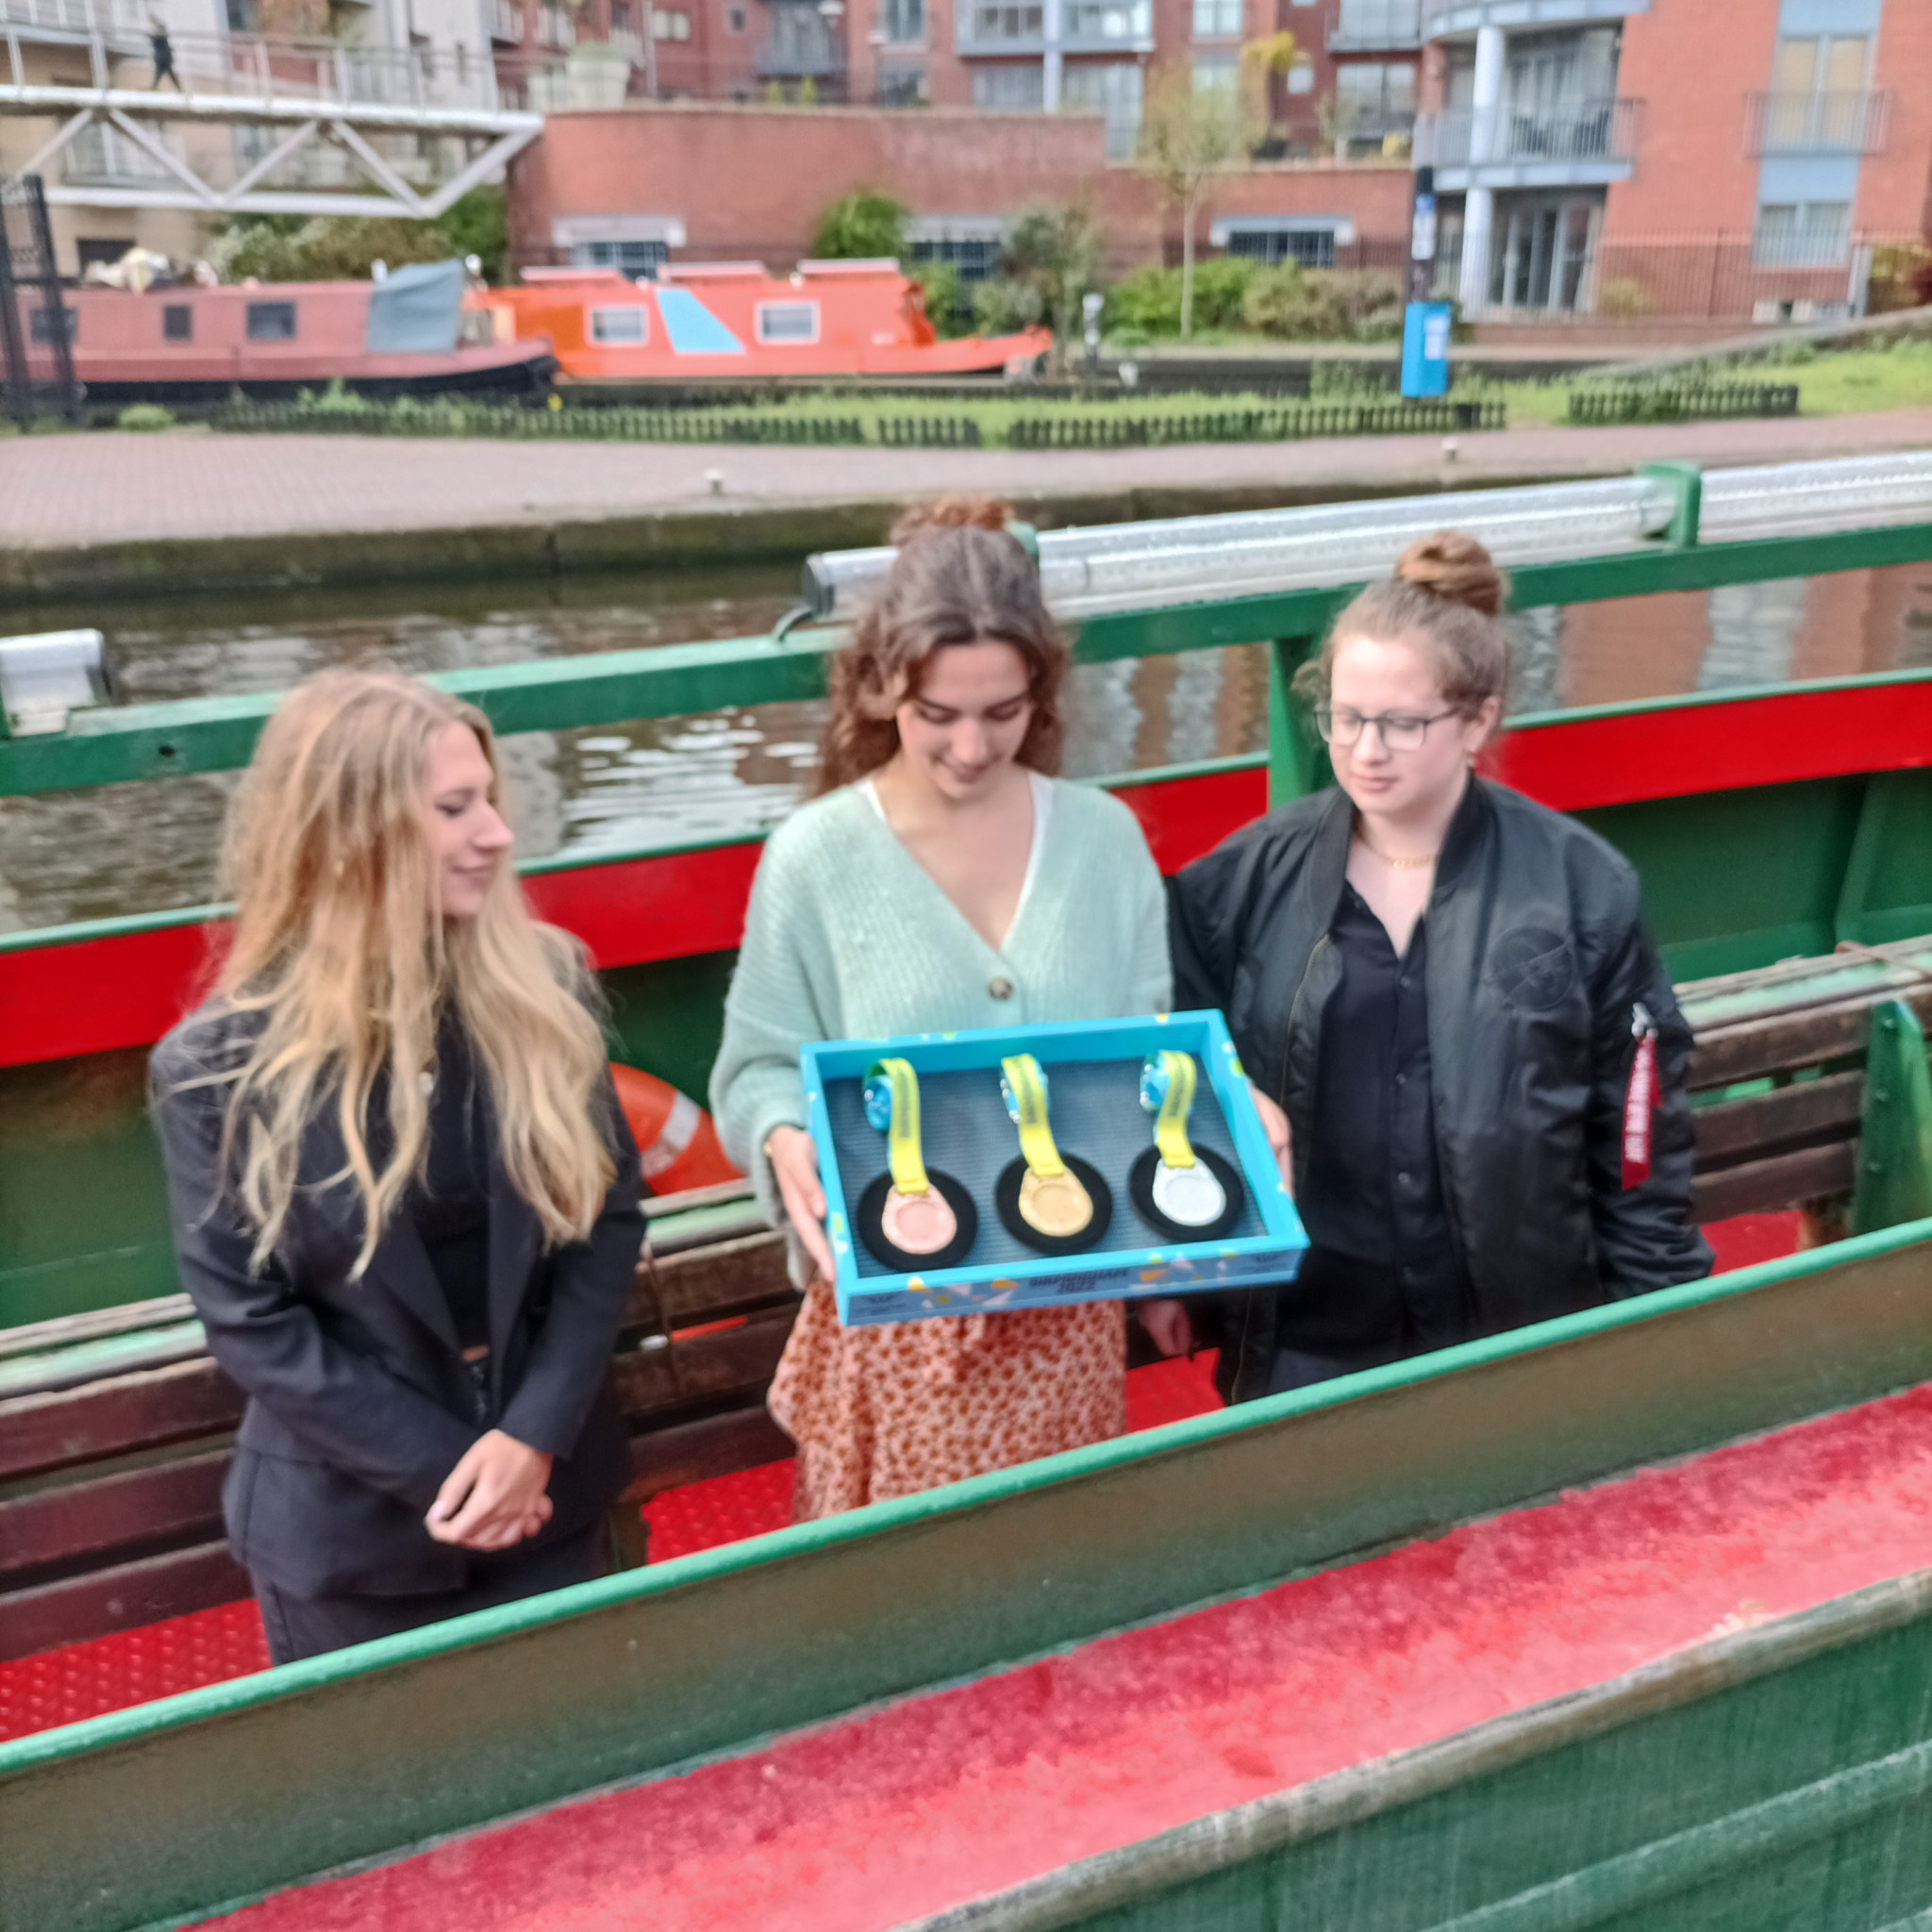 Birmingham 2022 Commonwealth Games medals unveiled after narrowboat journey